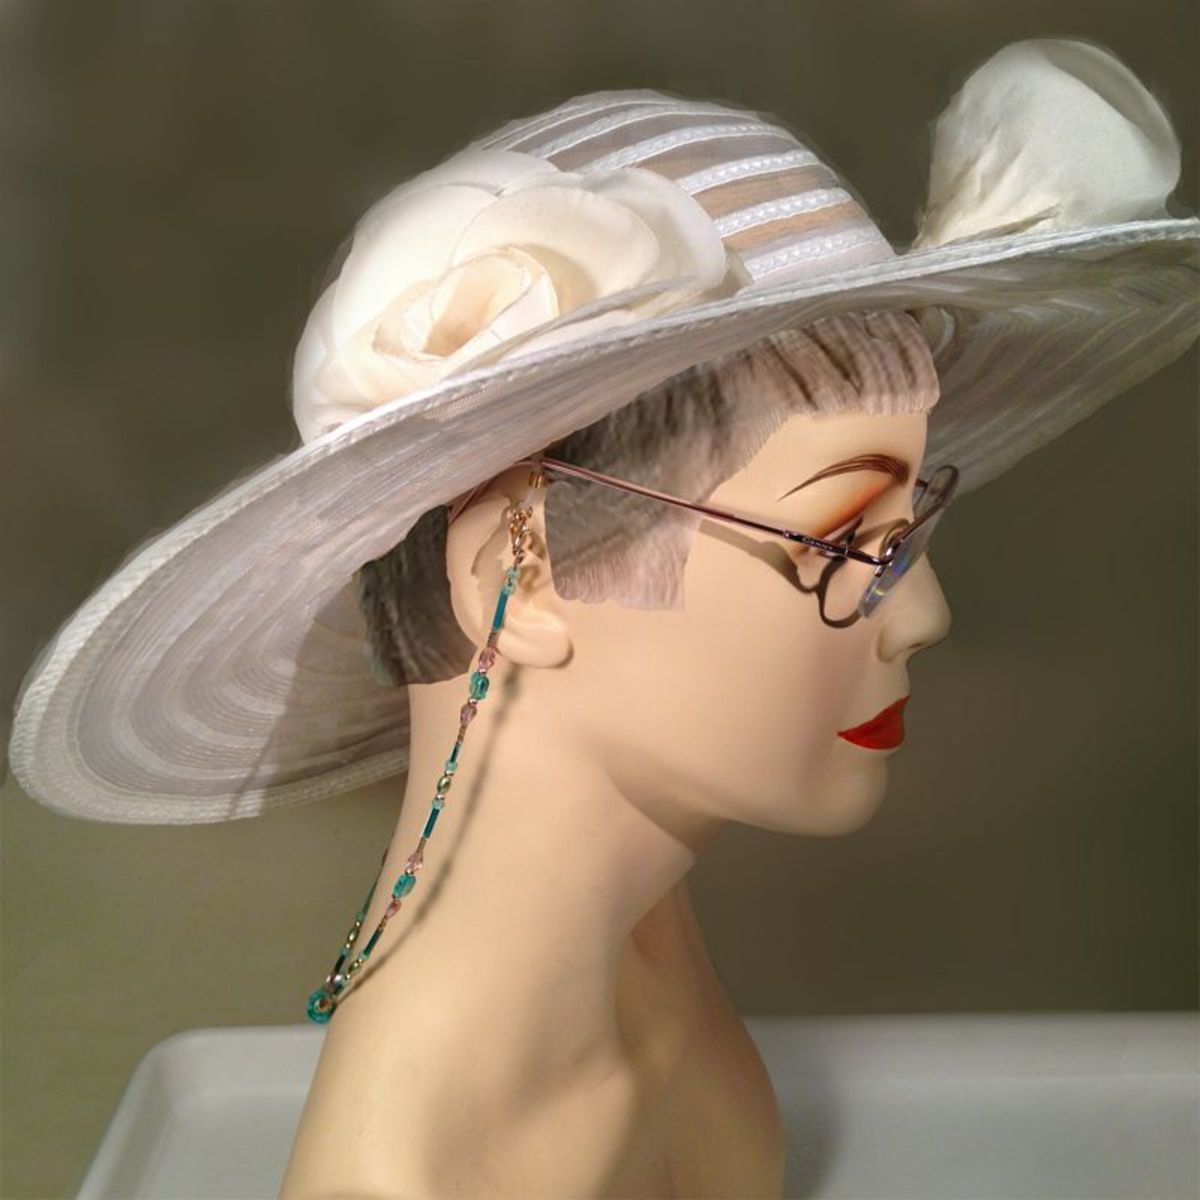 The finished beaded eyeglass chain displayed with glasses on a mannequin.